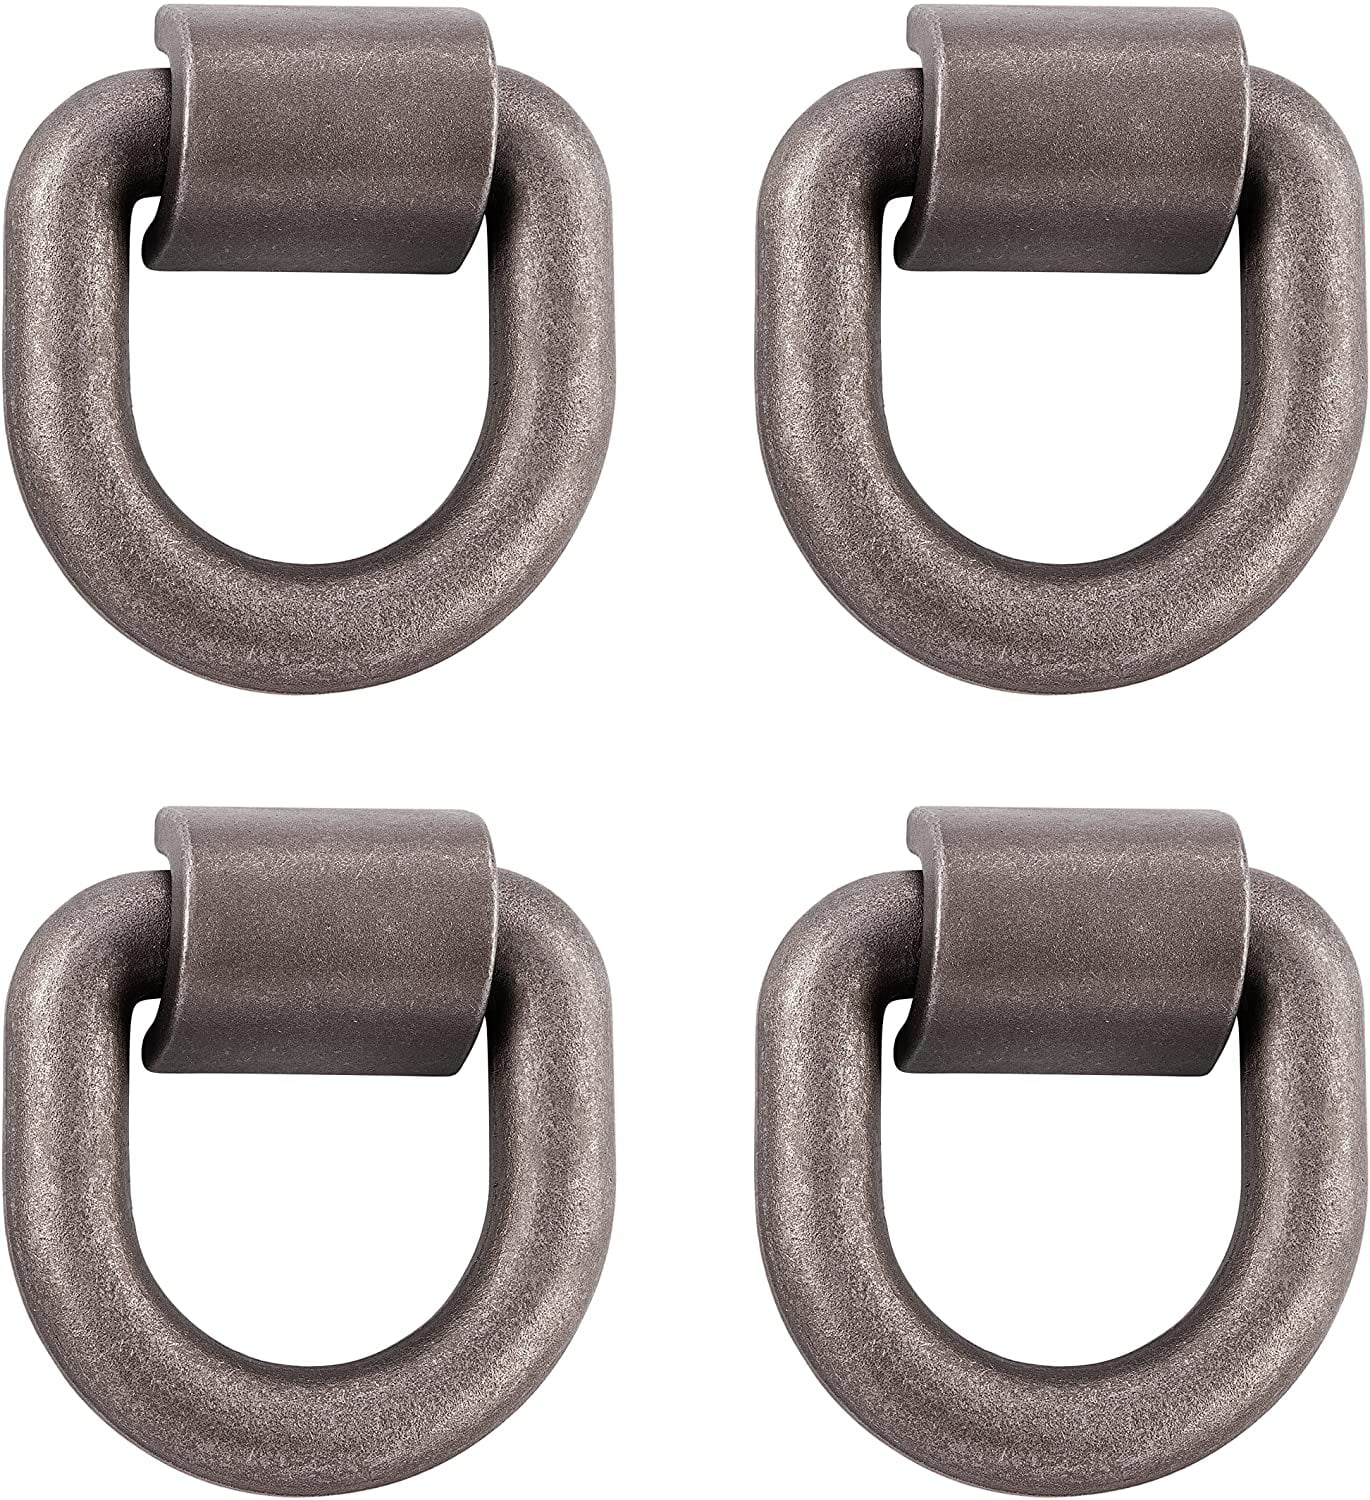 and Cargo Tie Downs Trucks Pack of 4 47,000 Pounds Break Strength for Trailers Goreks Weld on D Ring Mount 1 Inch Tie Down Anchor with Bracket 